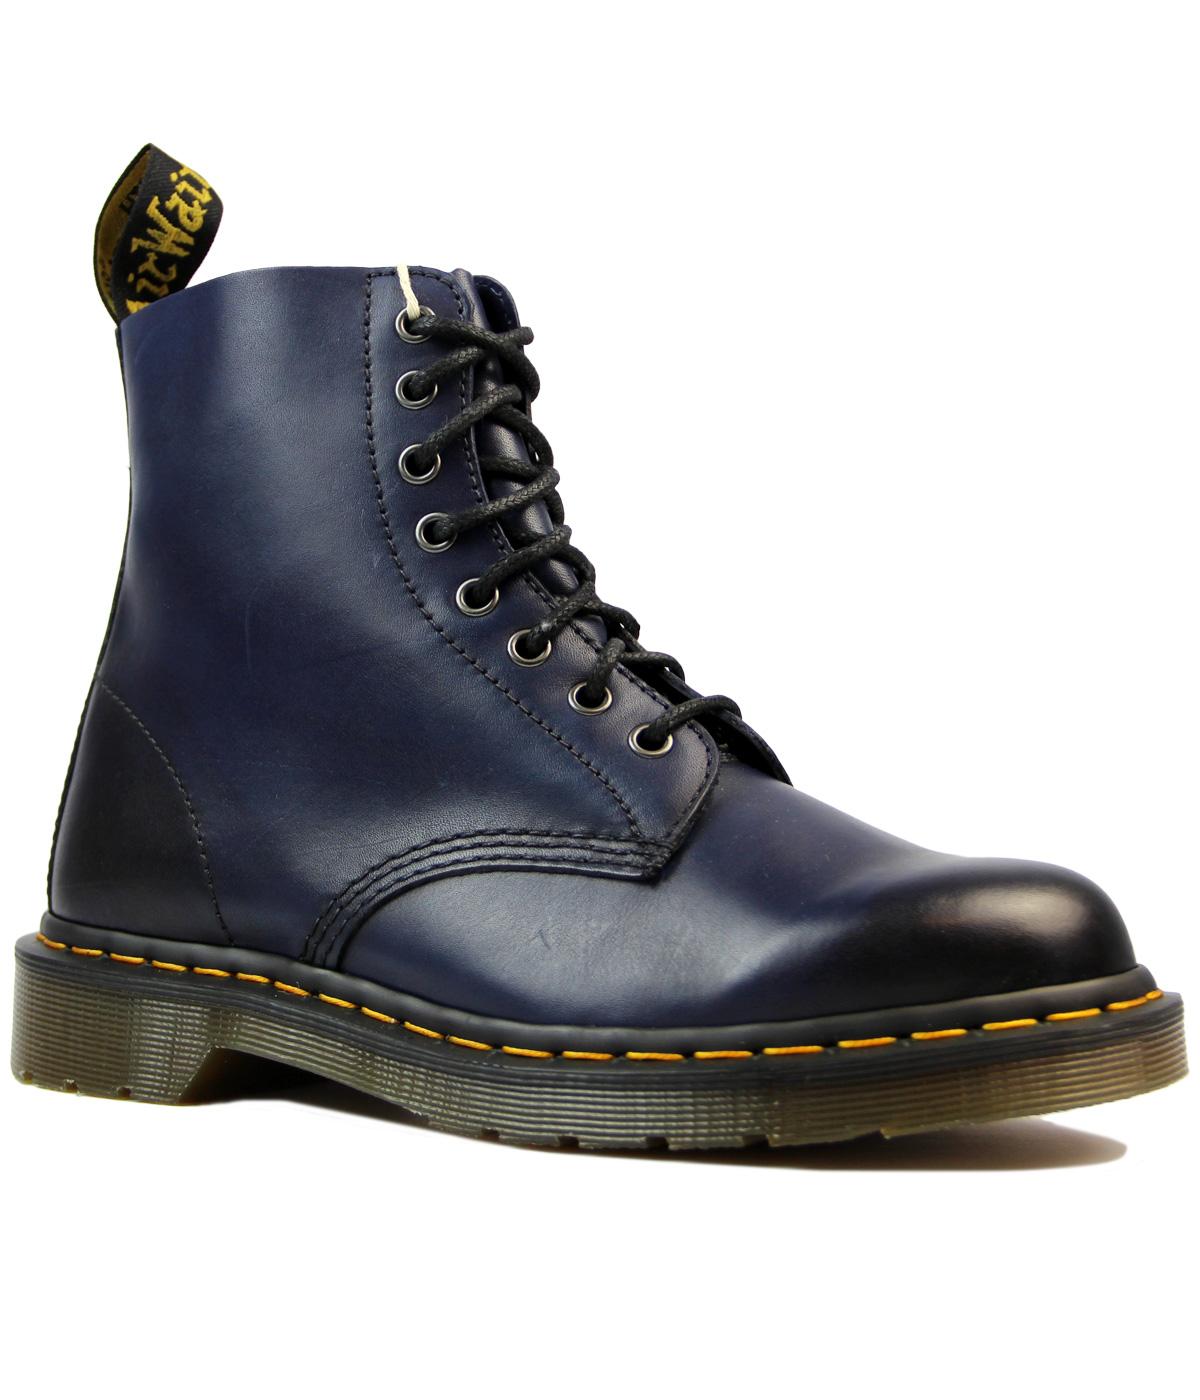 DR MARTENS Pascal Mod Antique Temperley Boots in Navy